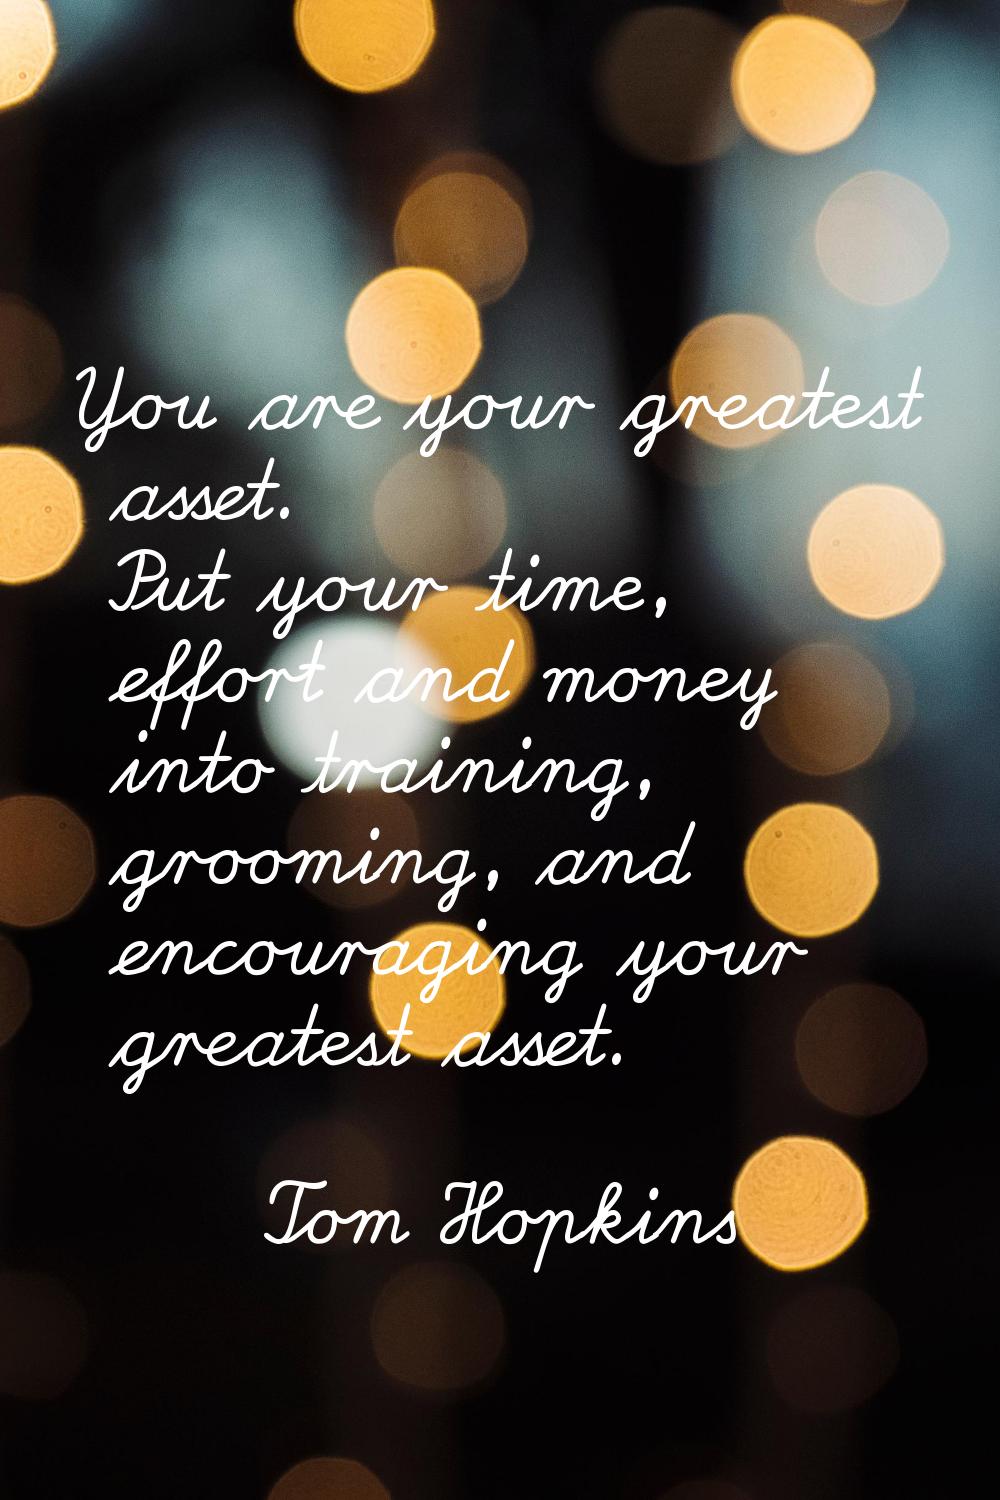 You are your greatest asset. Put your time, effort and money into training, grooming, and encouragi